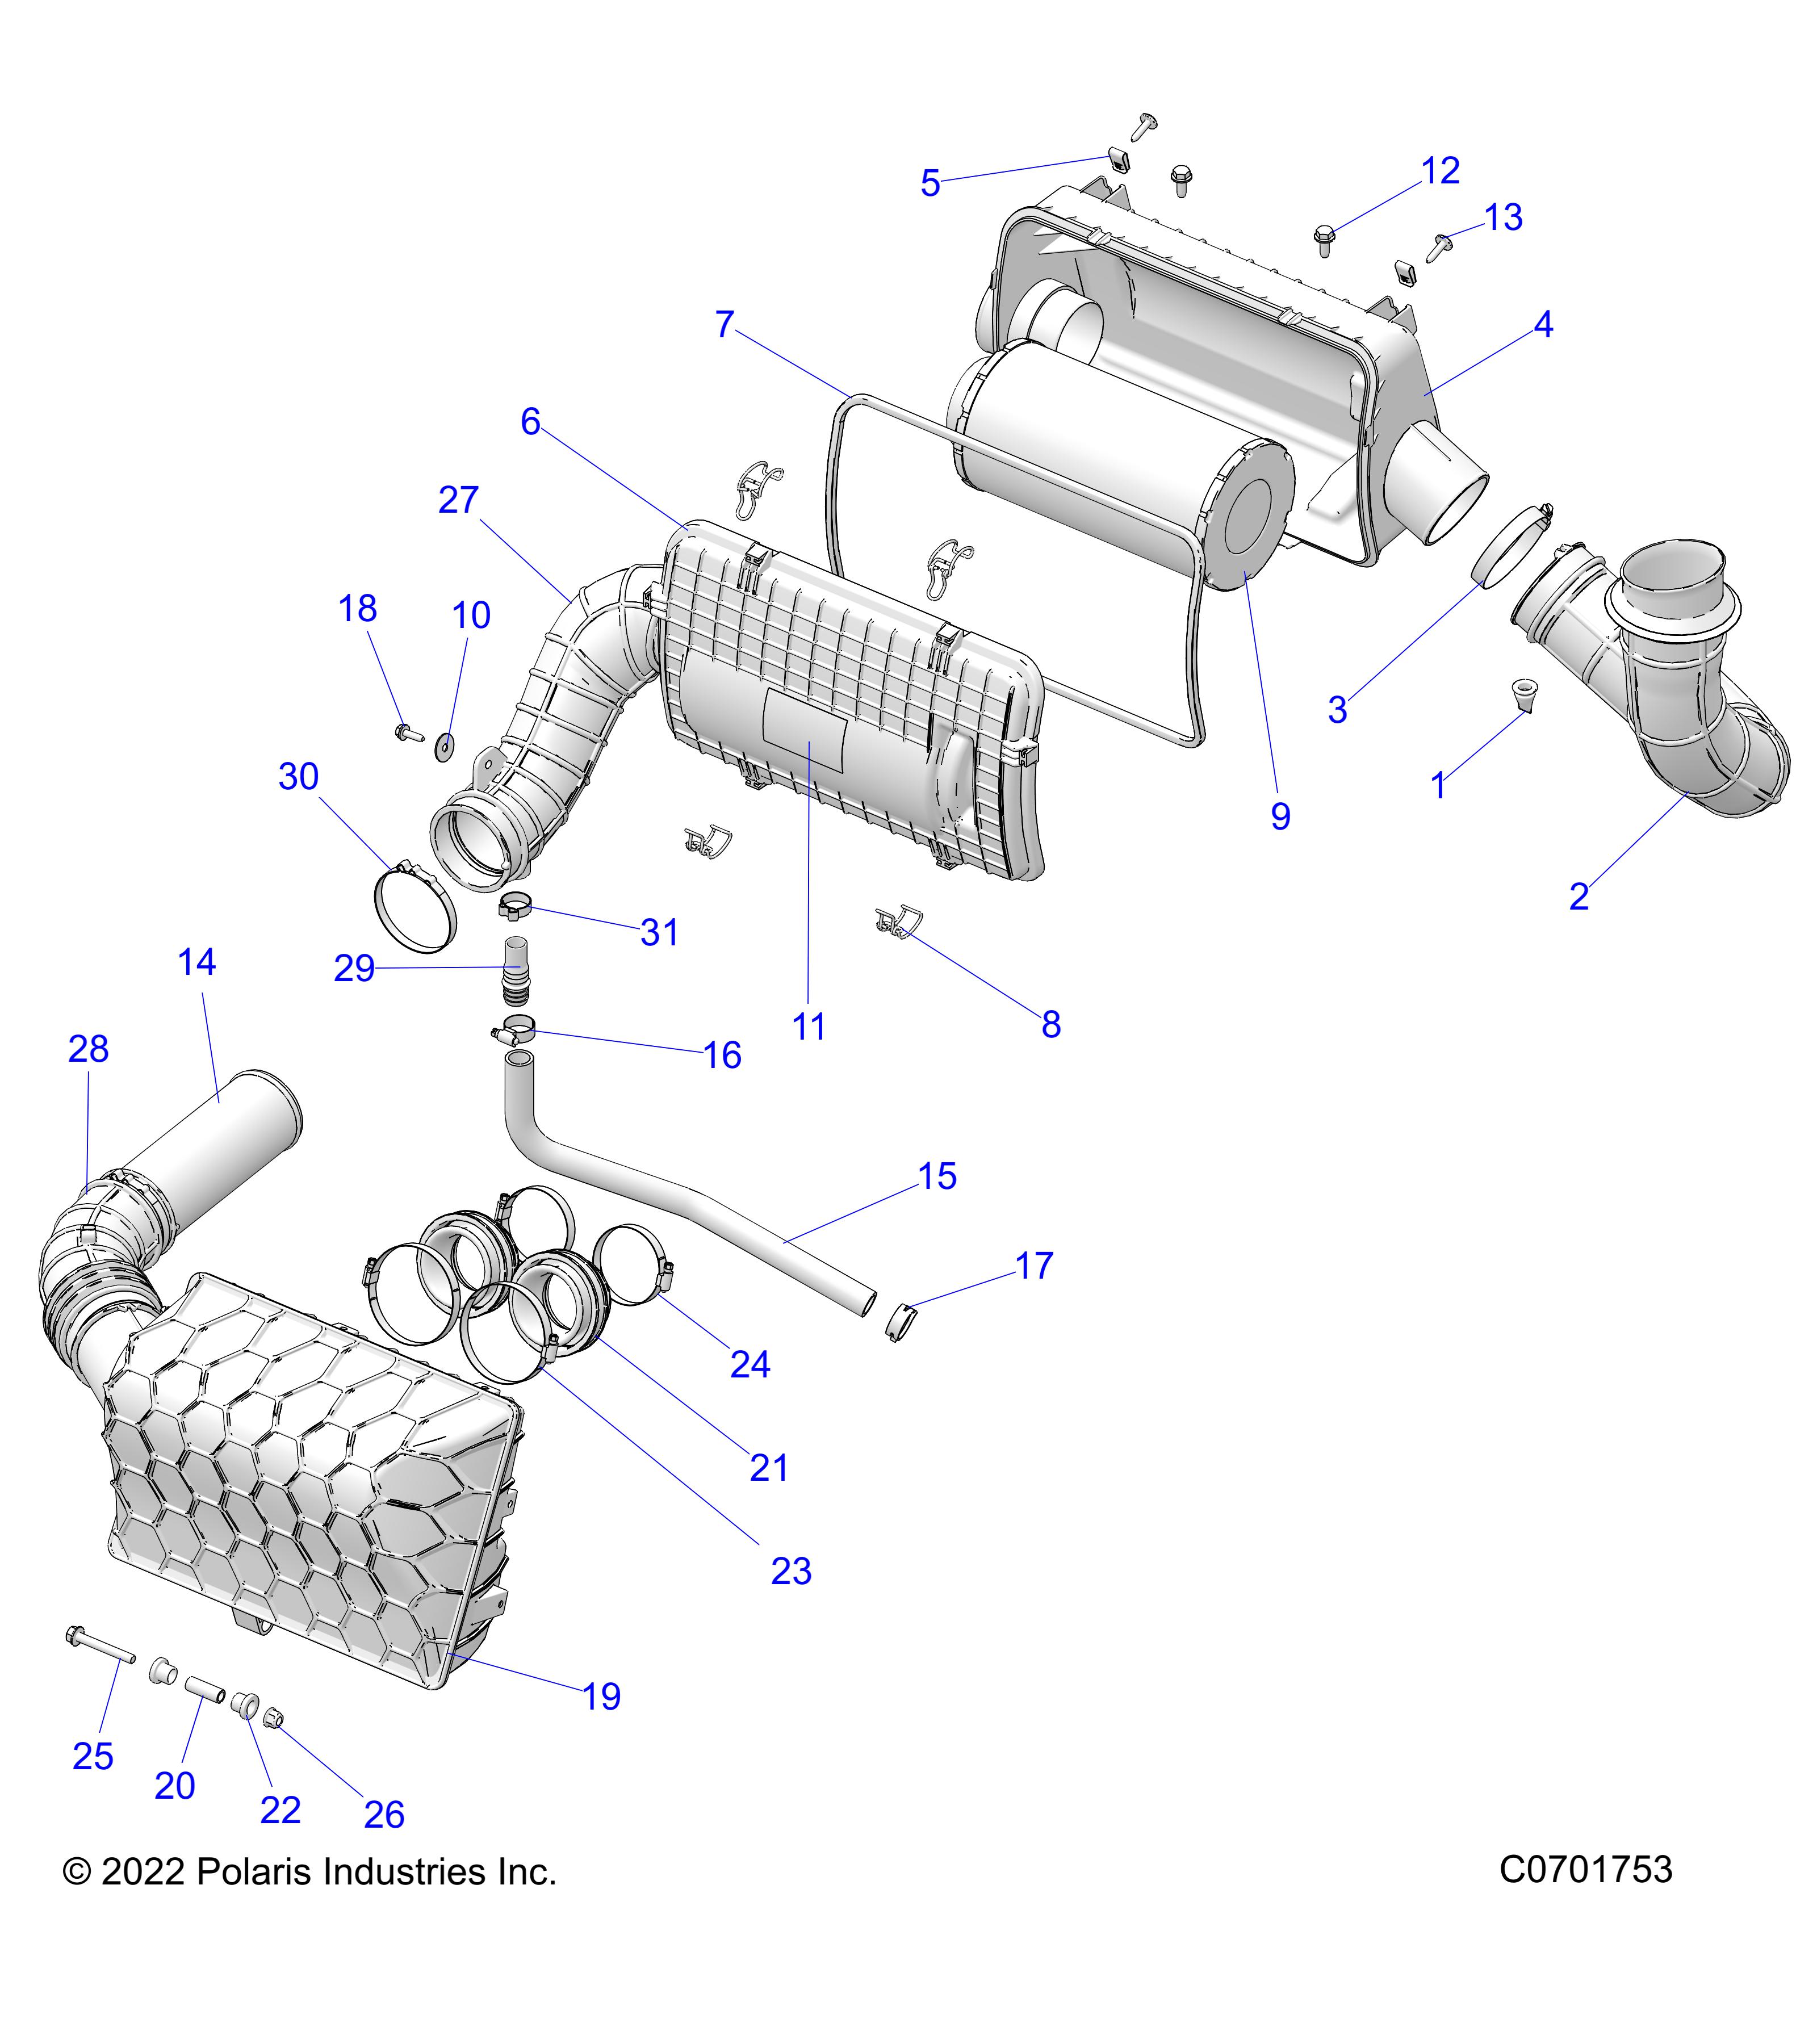 Part Number : 1240747 AIRBOX HOUSING ASSEMBLY